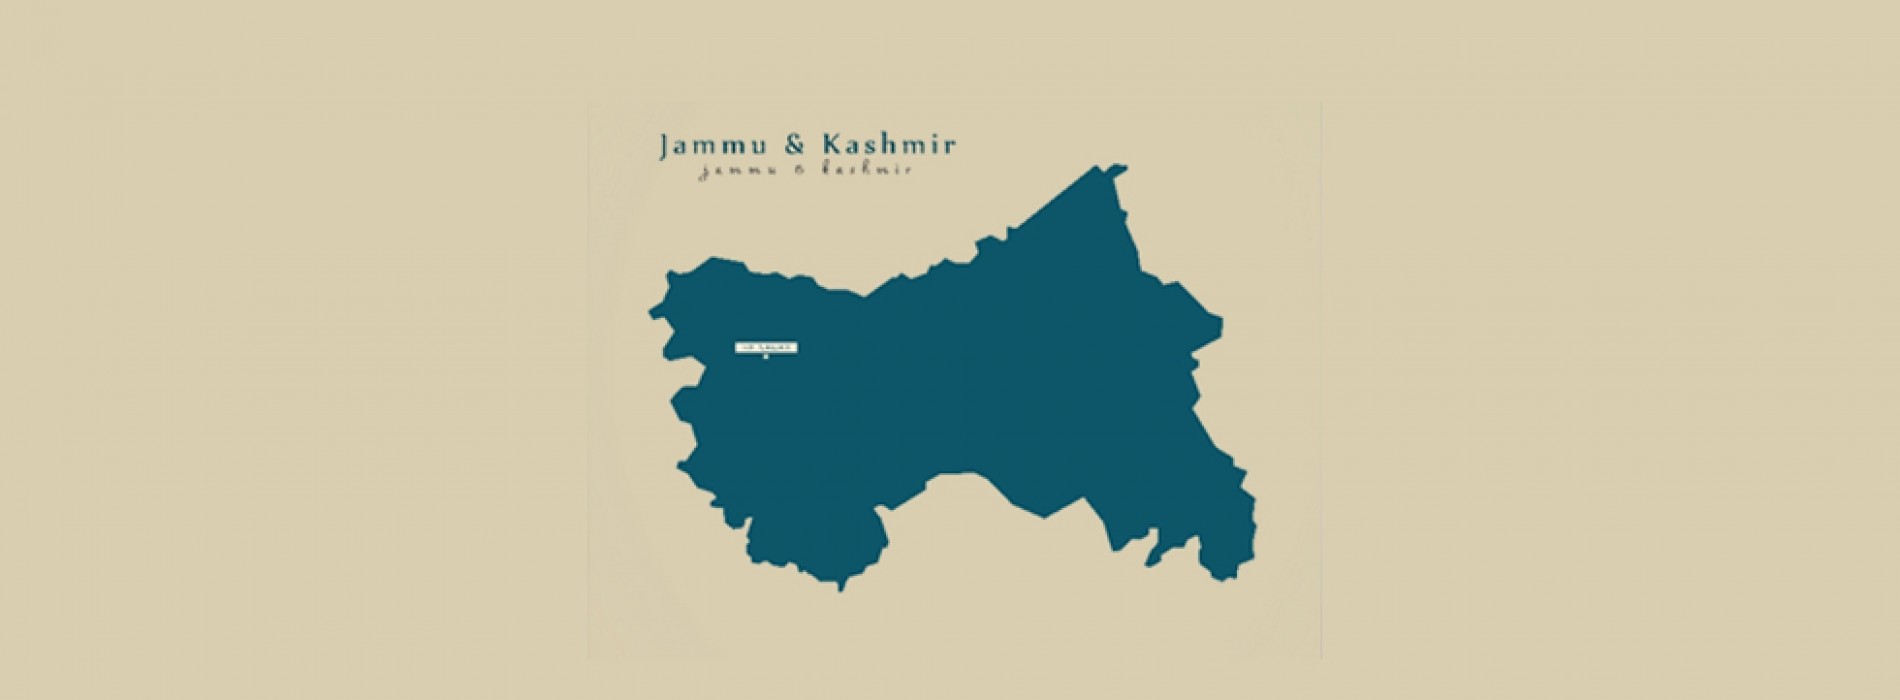 M/o Tourism approves projects of Rs. 500 crore for Jammu & Kashmir